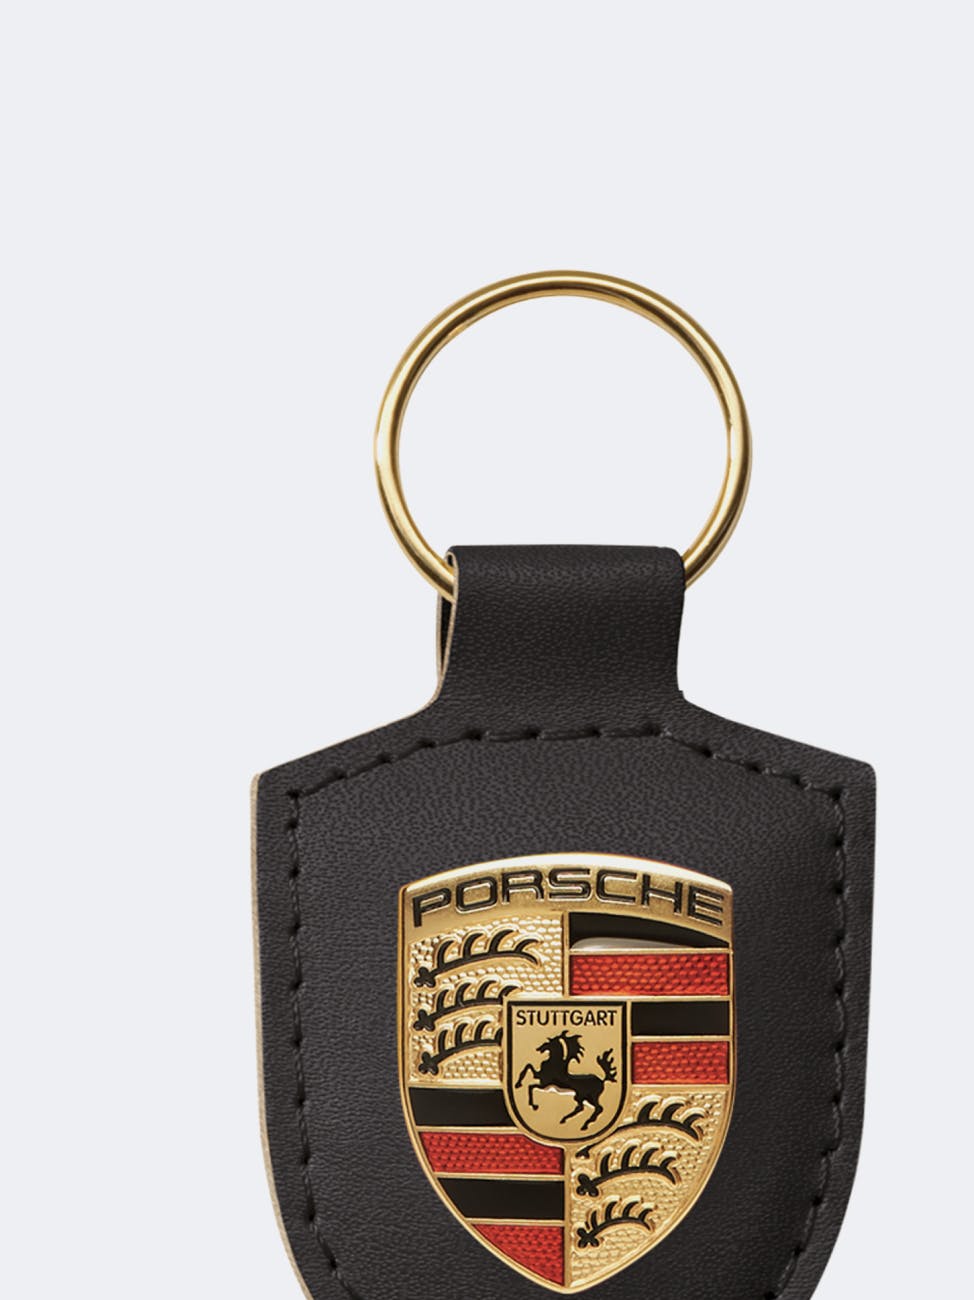 You can see a black key ring from Porsche Lifestyle.
